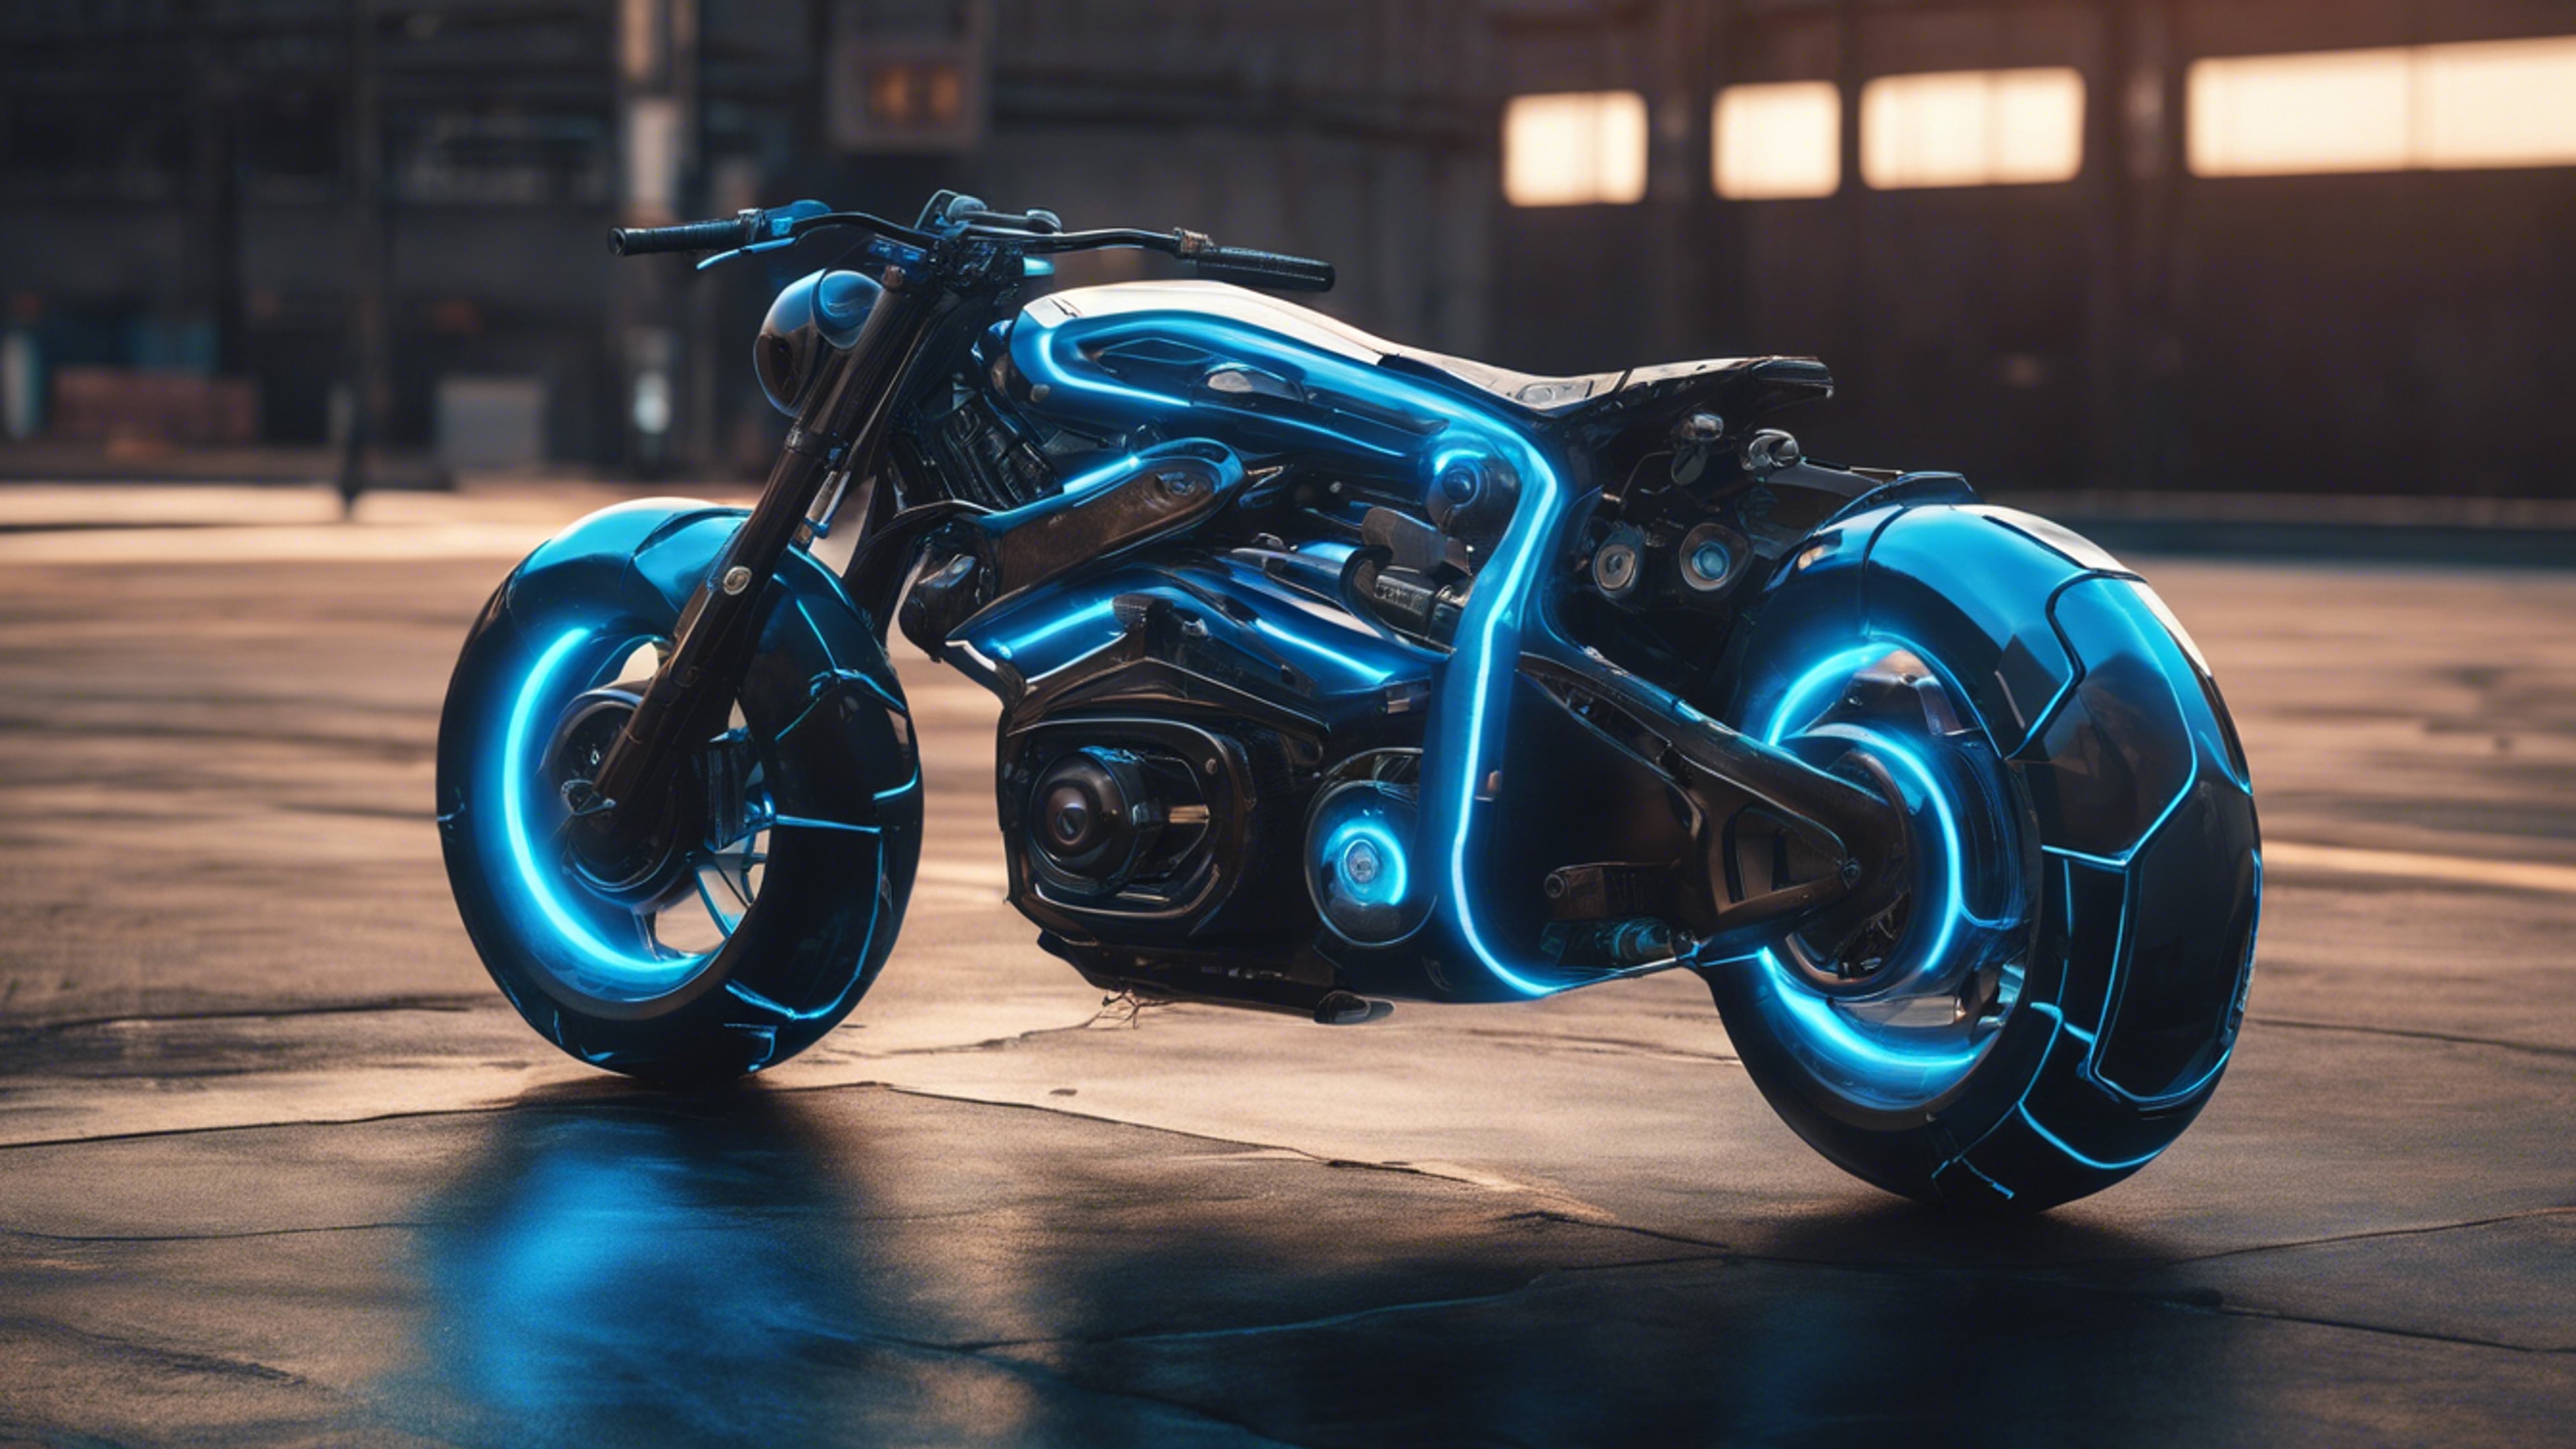 A concept art of a cool futuristic motorcycle, designed in neon black and blue colors. Wallpaper[616cf7a0093641f39ad2]